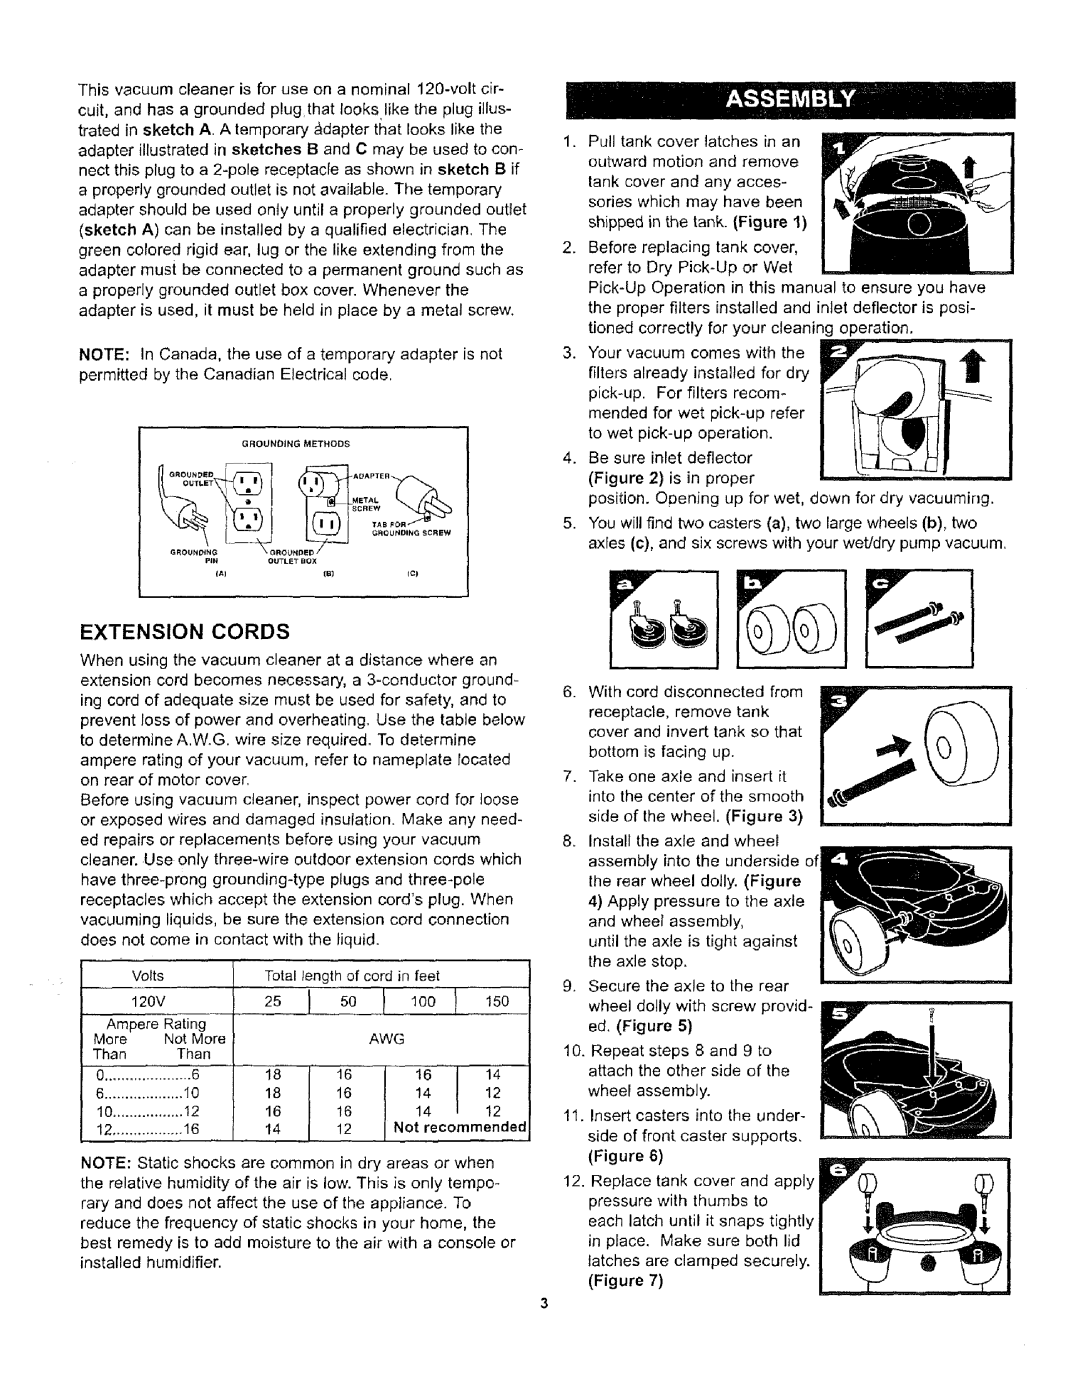 Craftsman 338.17923 owner manual Extension Cords, on rear of motor cover 